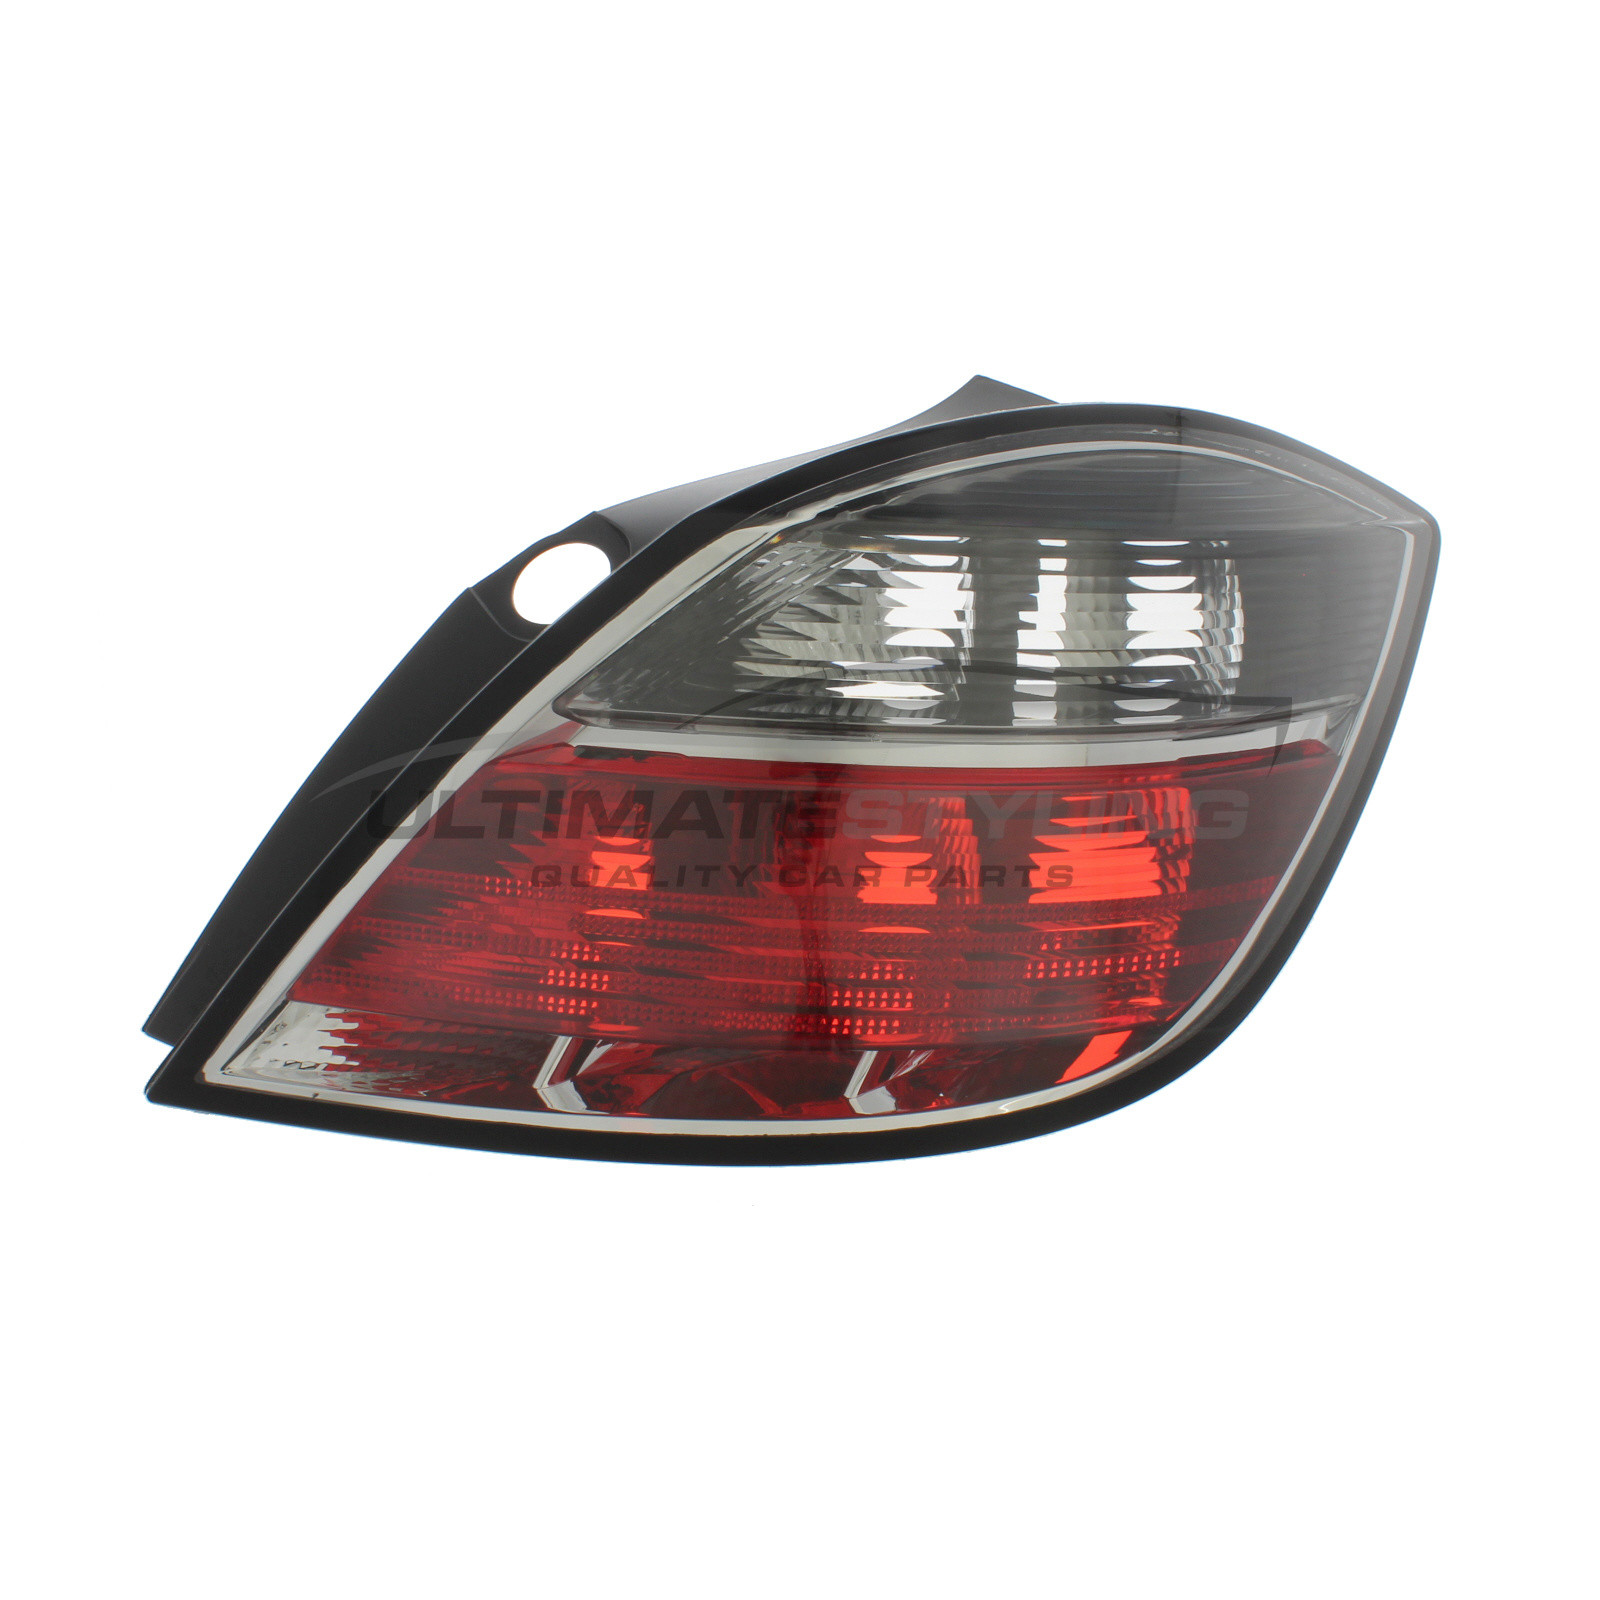 Vauxhall Astra 2007-2011 Non-LED with Smoked Indicator Rear Light / Tail Light Excluding Bulb Holder Drivers Side (RH)